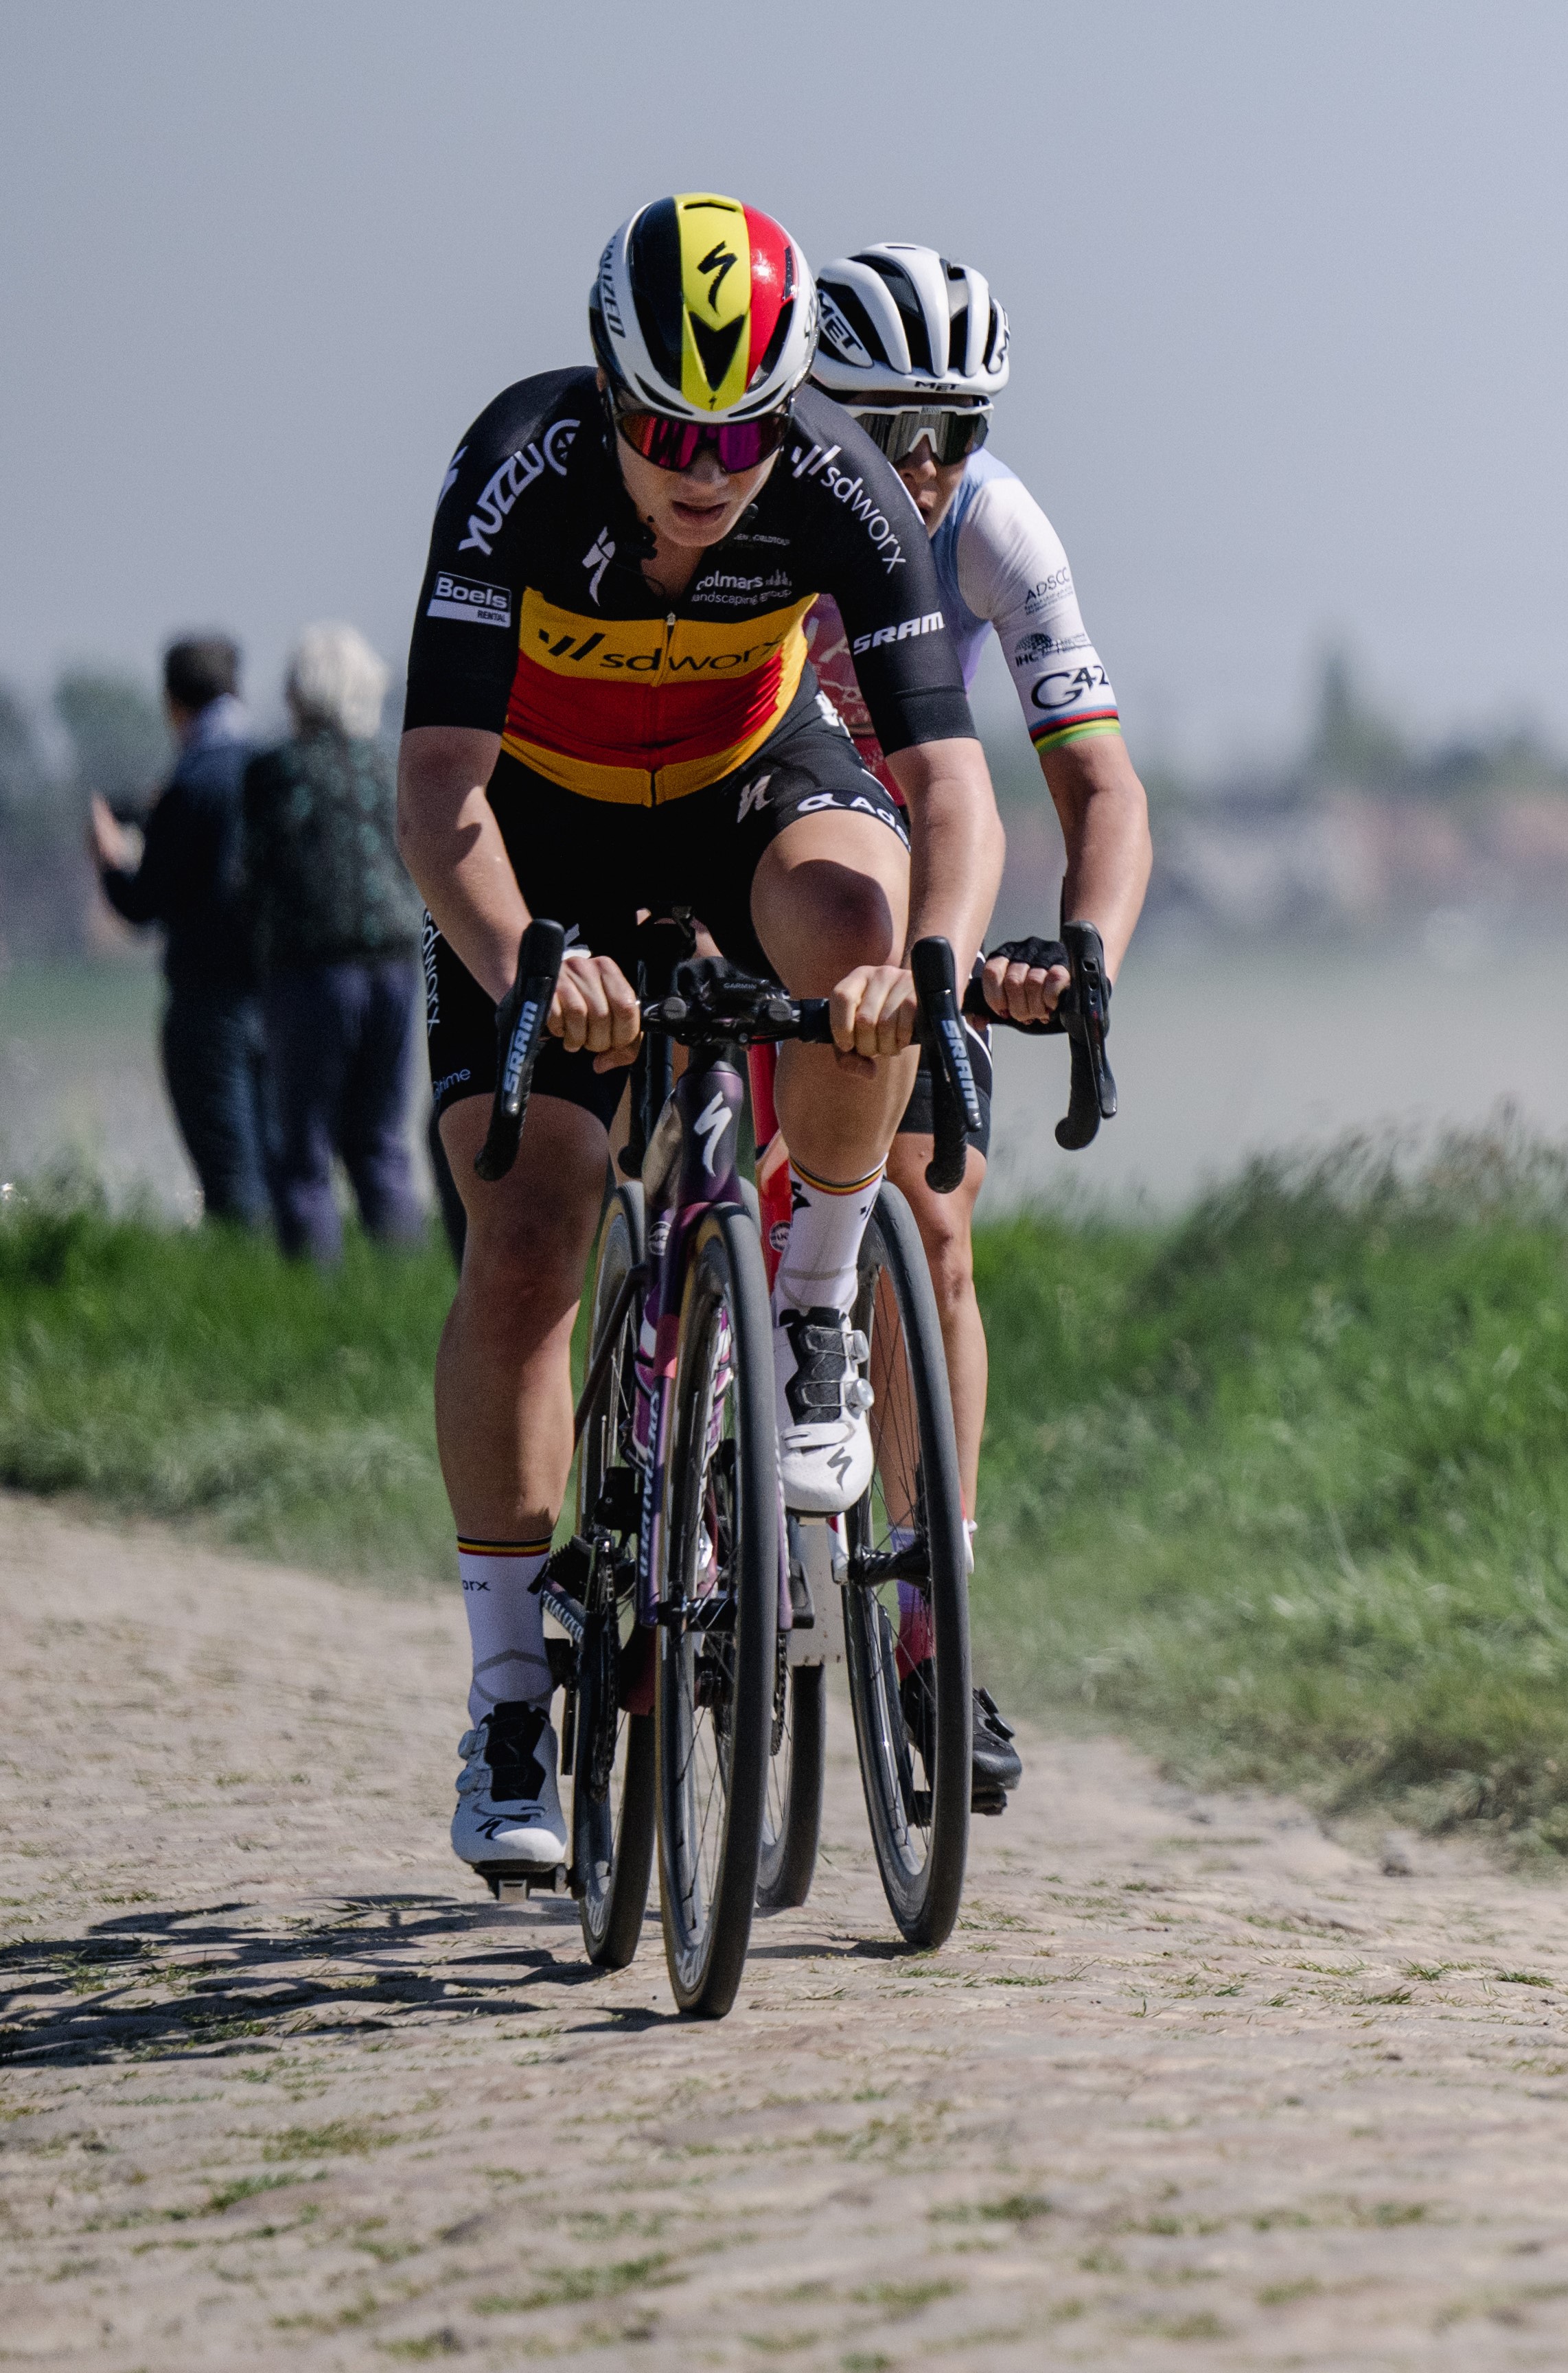 Lotte Kopecky finishes 2nd in Paris-Roubaix